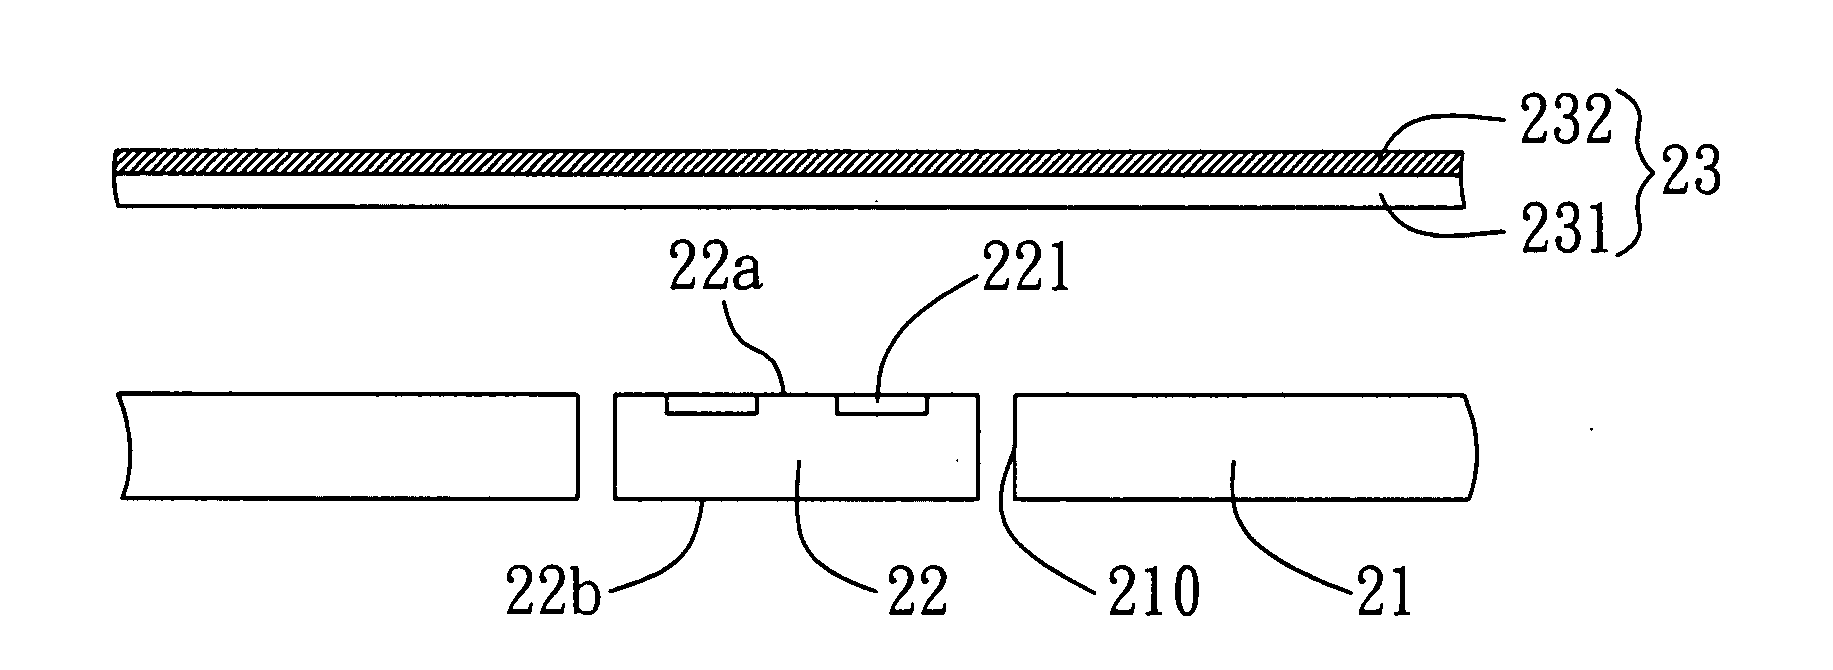 Circuit board structure with embedded semiconductor chip and method for fabricating the same